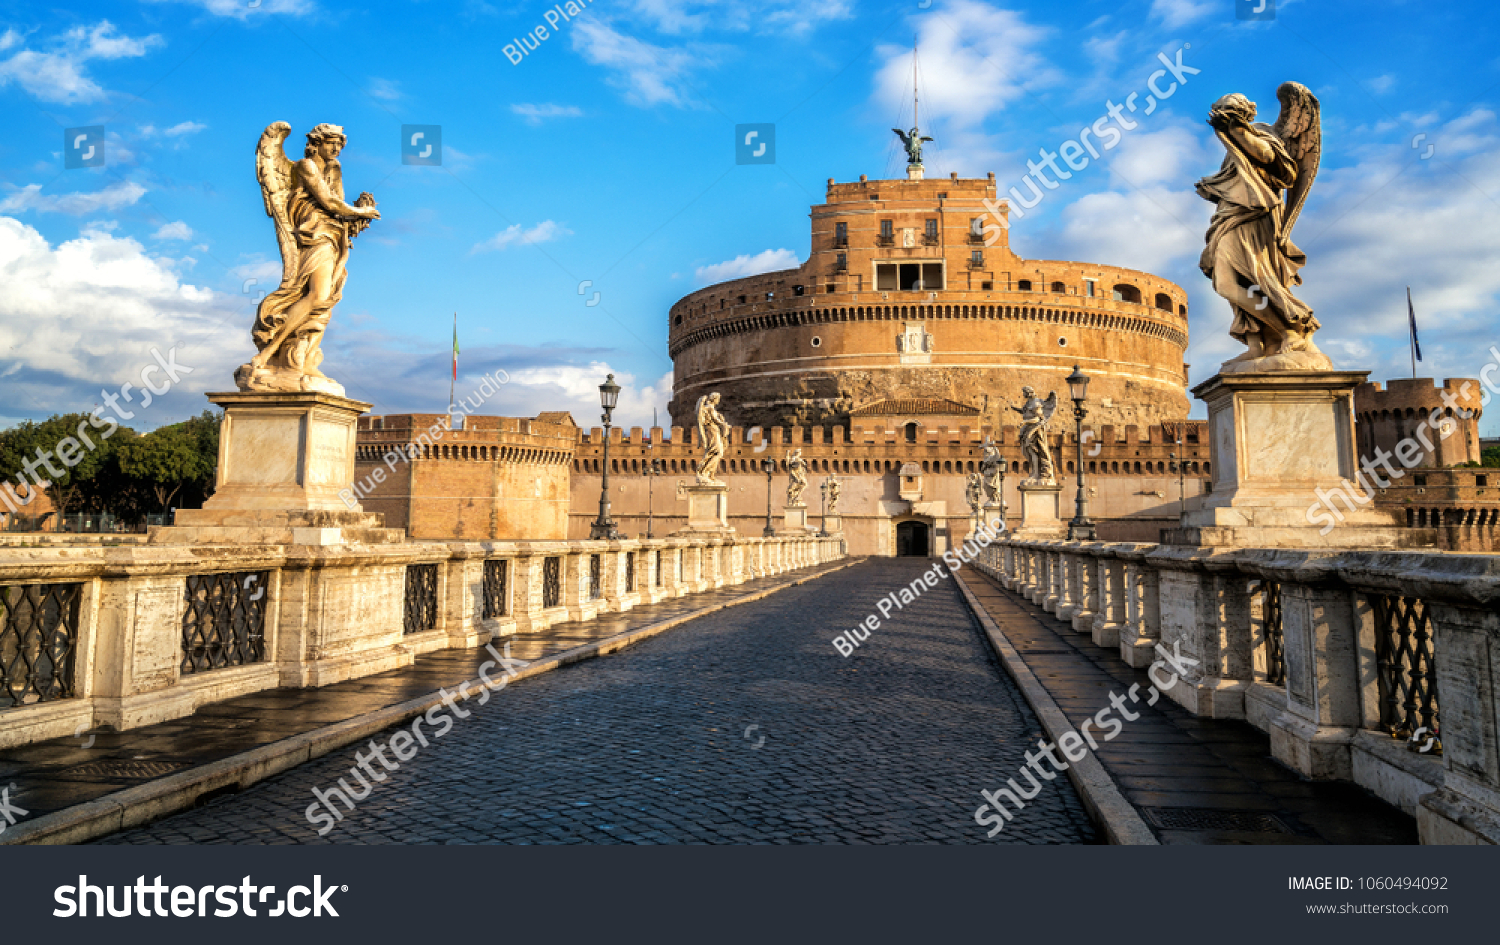 Castel Sant Angelo or Mausoleum of Hadrian in Rome Italy, built in ancient Rome, it is now the famous tourist attraction of Italy. Castel Sant Angelo was once the tallest building of Rome. #1060494092